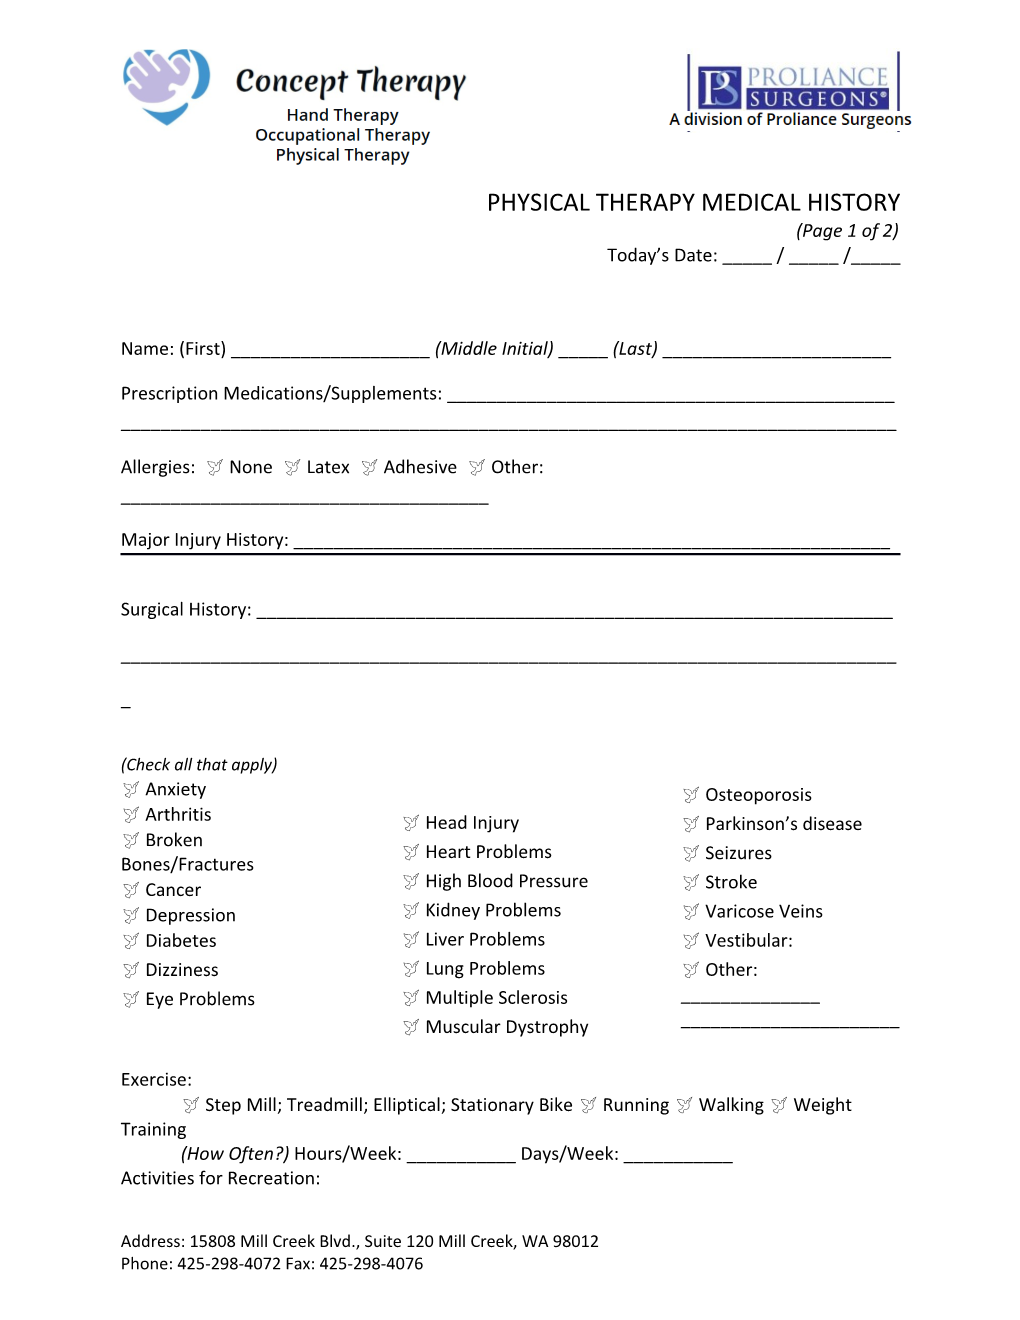 Physical Therapy Medical History